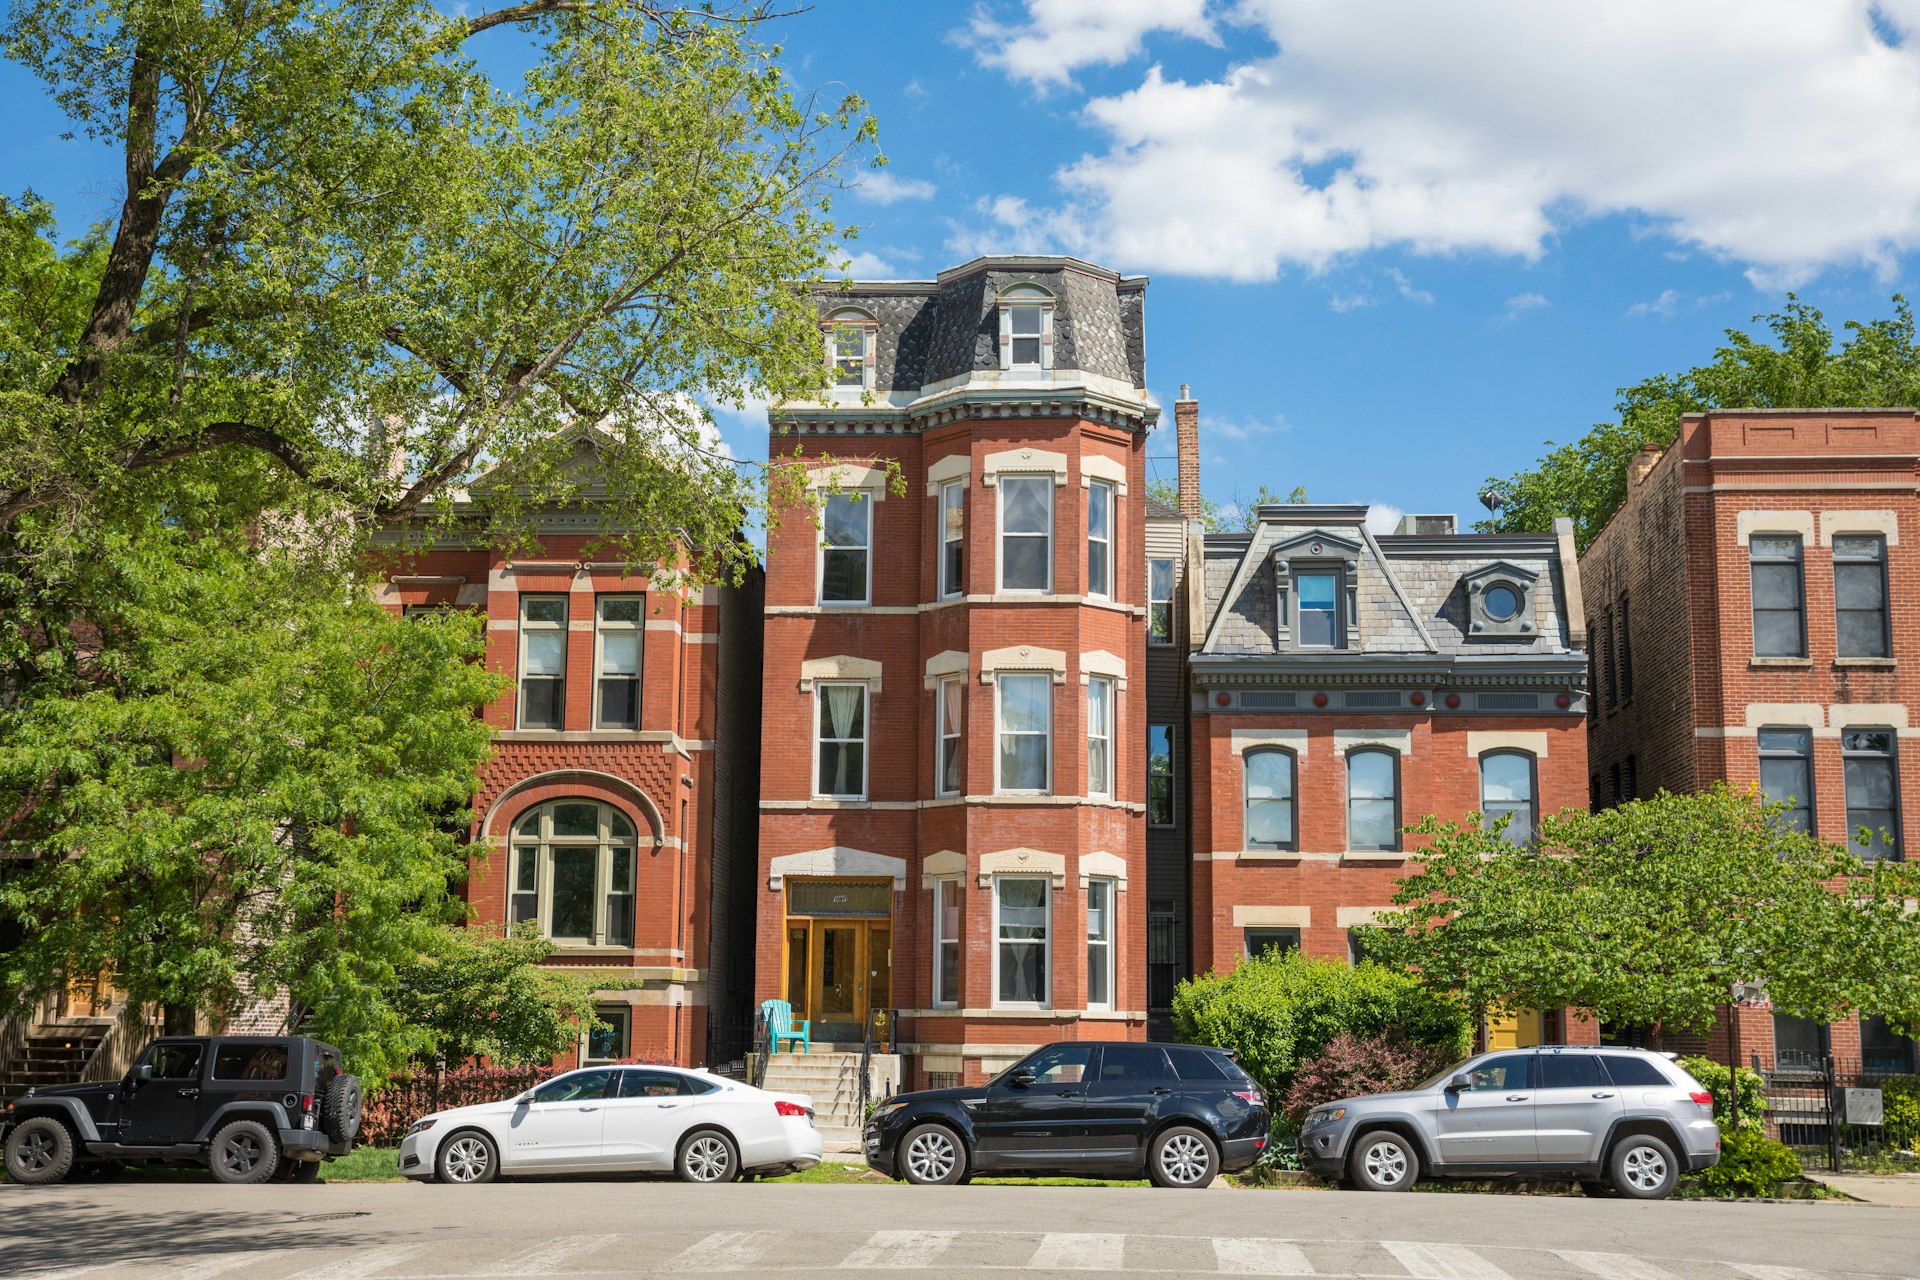 Historic brick homes sit in a row in Wicker Park, Chicago